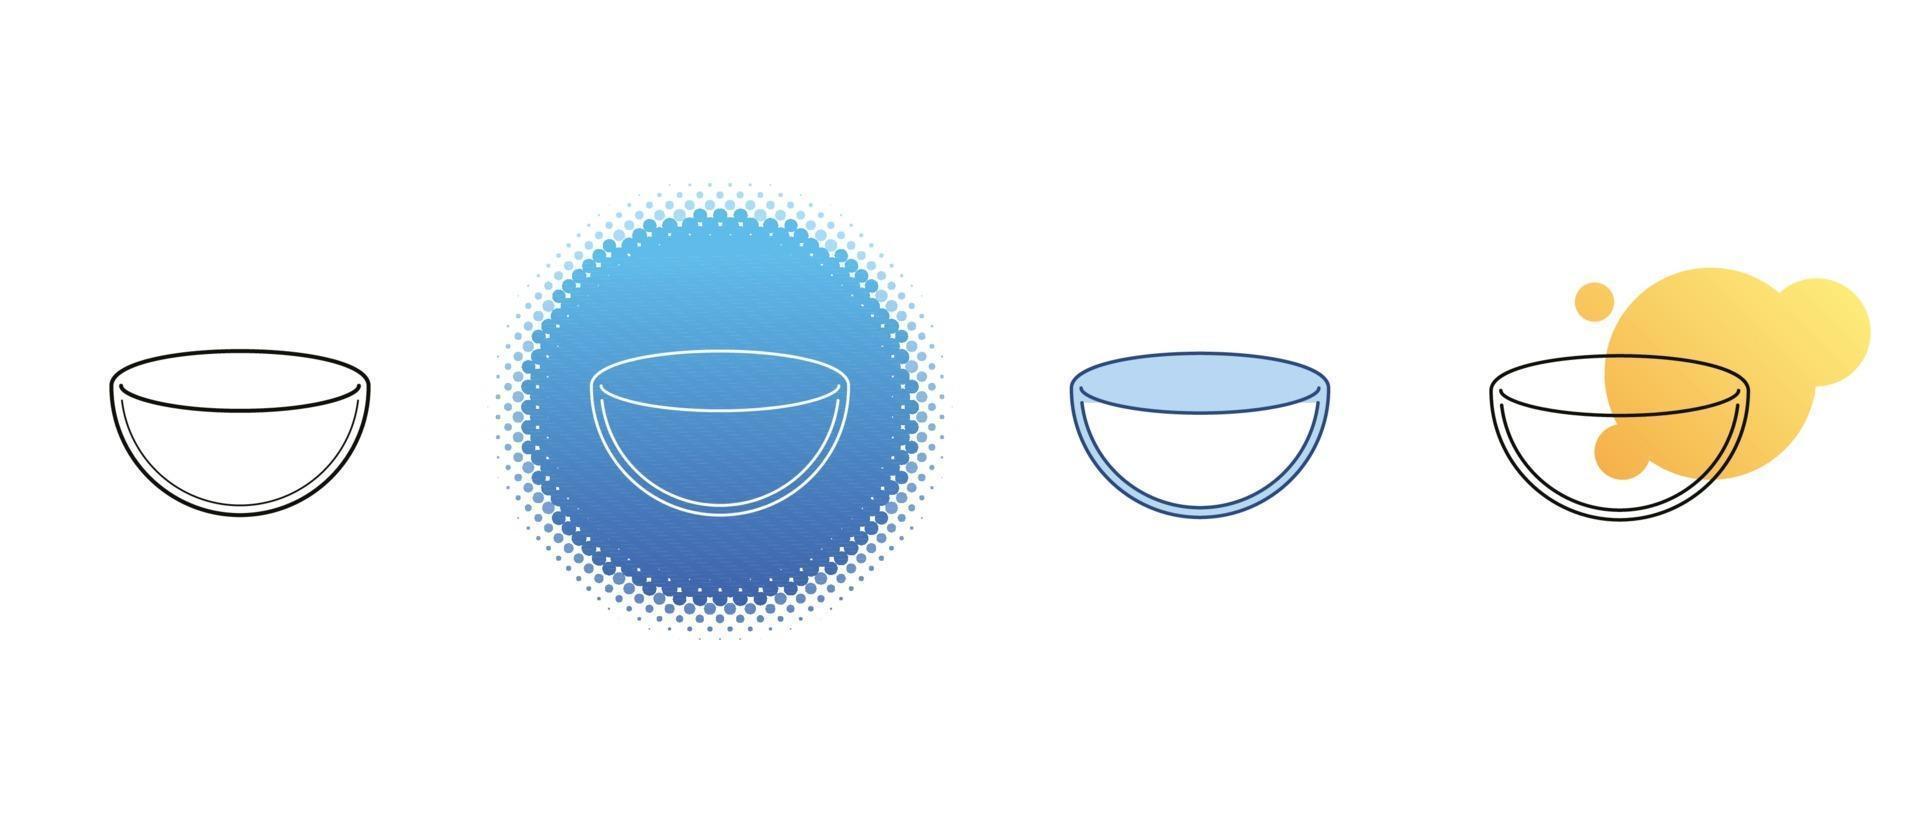 This is a set of contour and color salad bowl icons vector